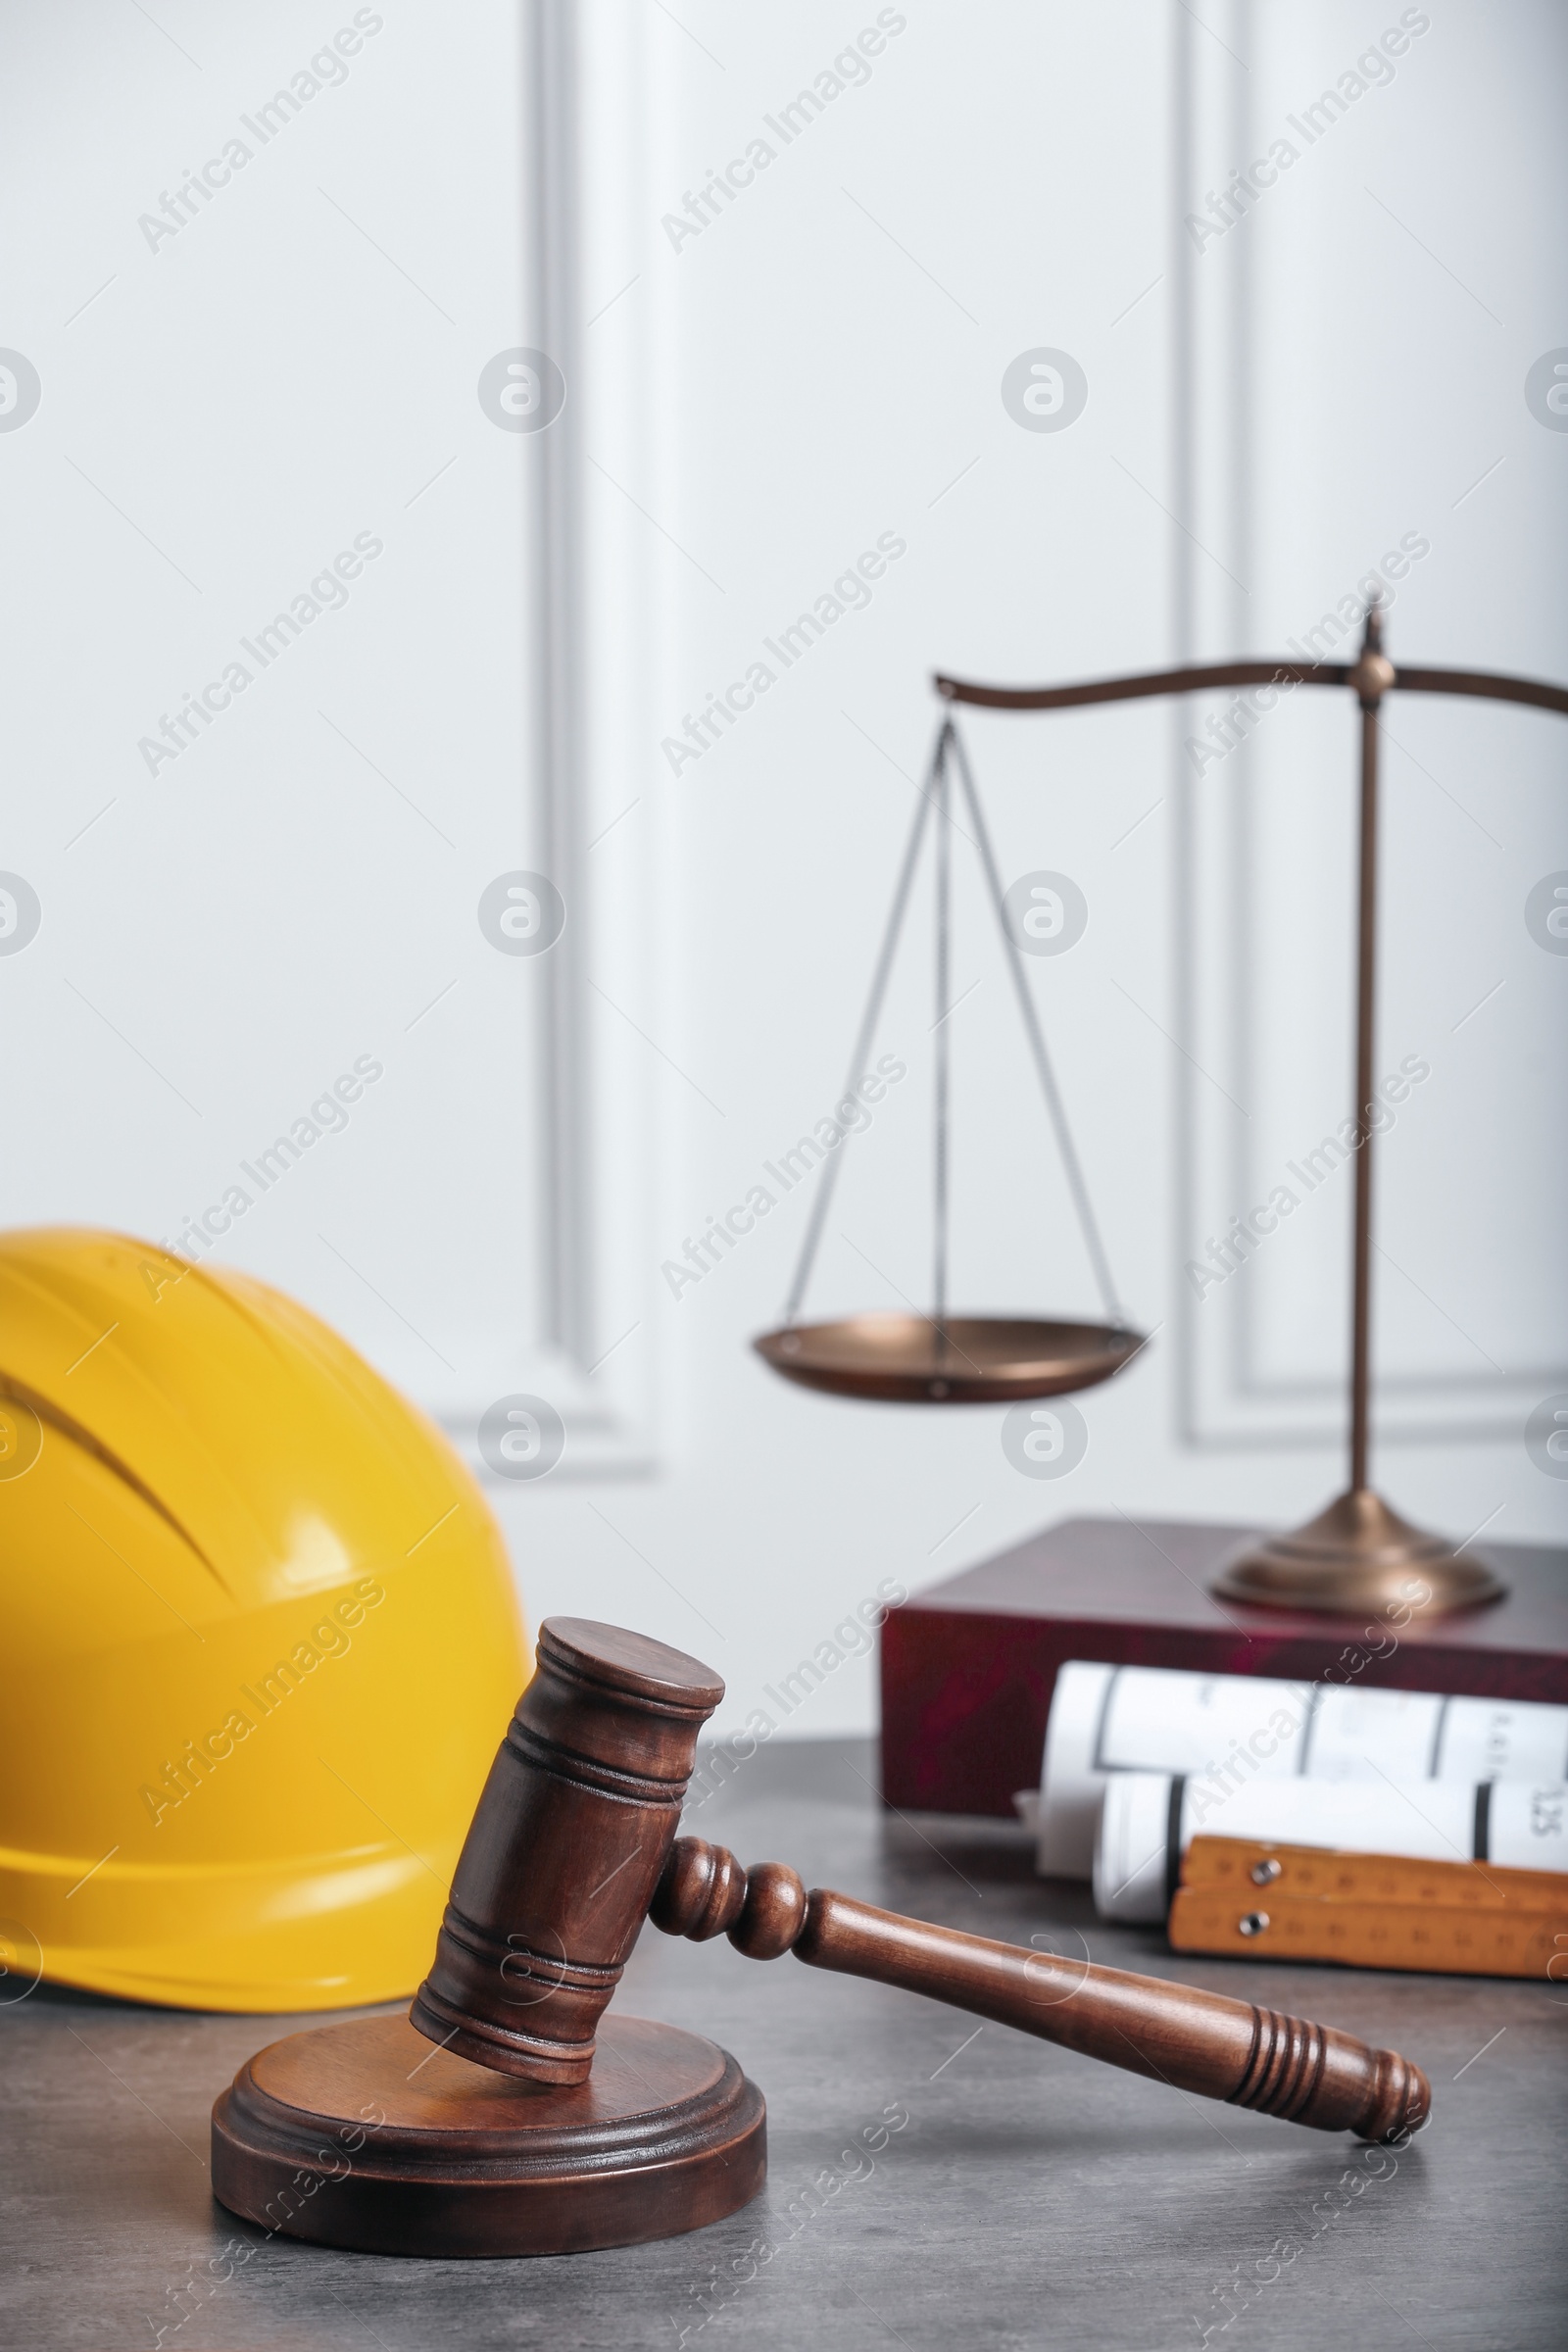 Photo of Construction and land law concepts. Judge gavel, scales of justice, protective helmet with drawings on grey table